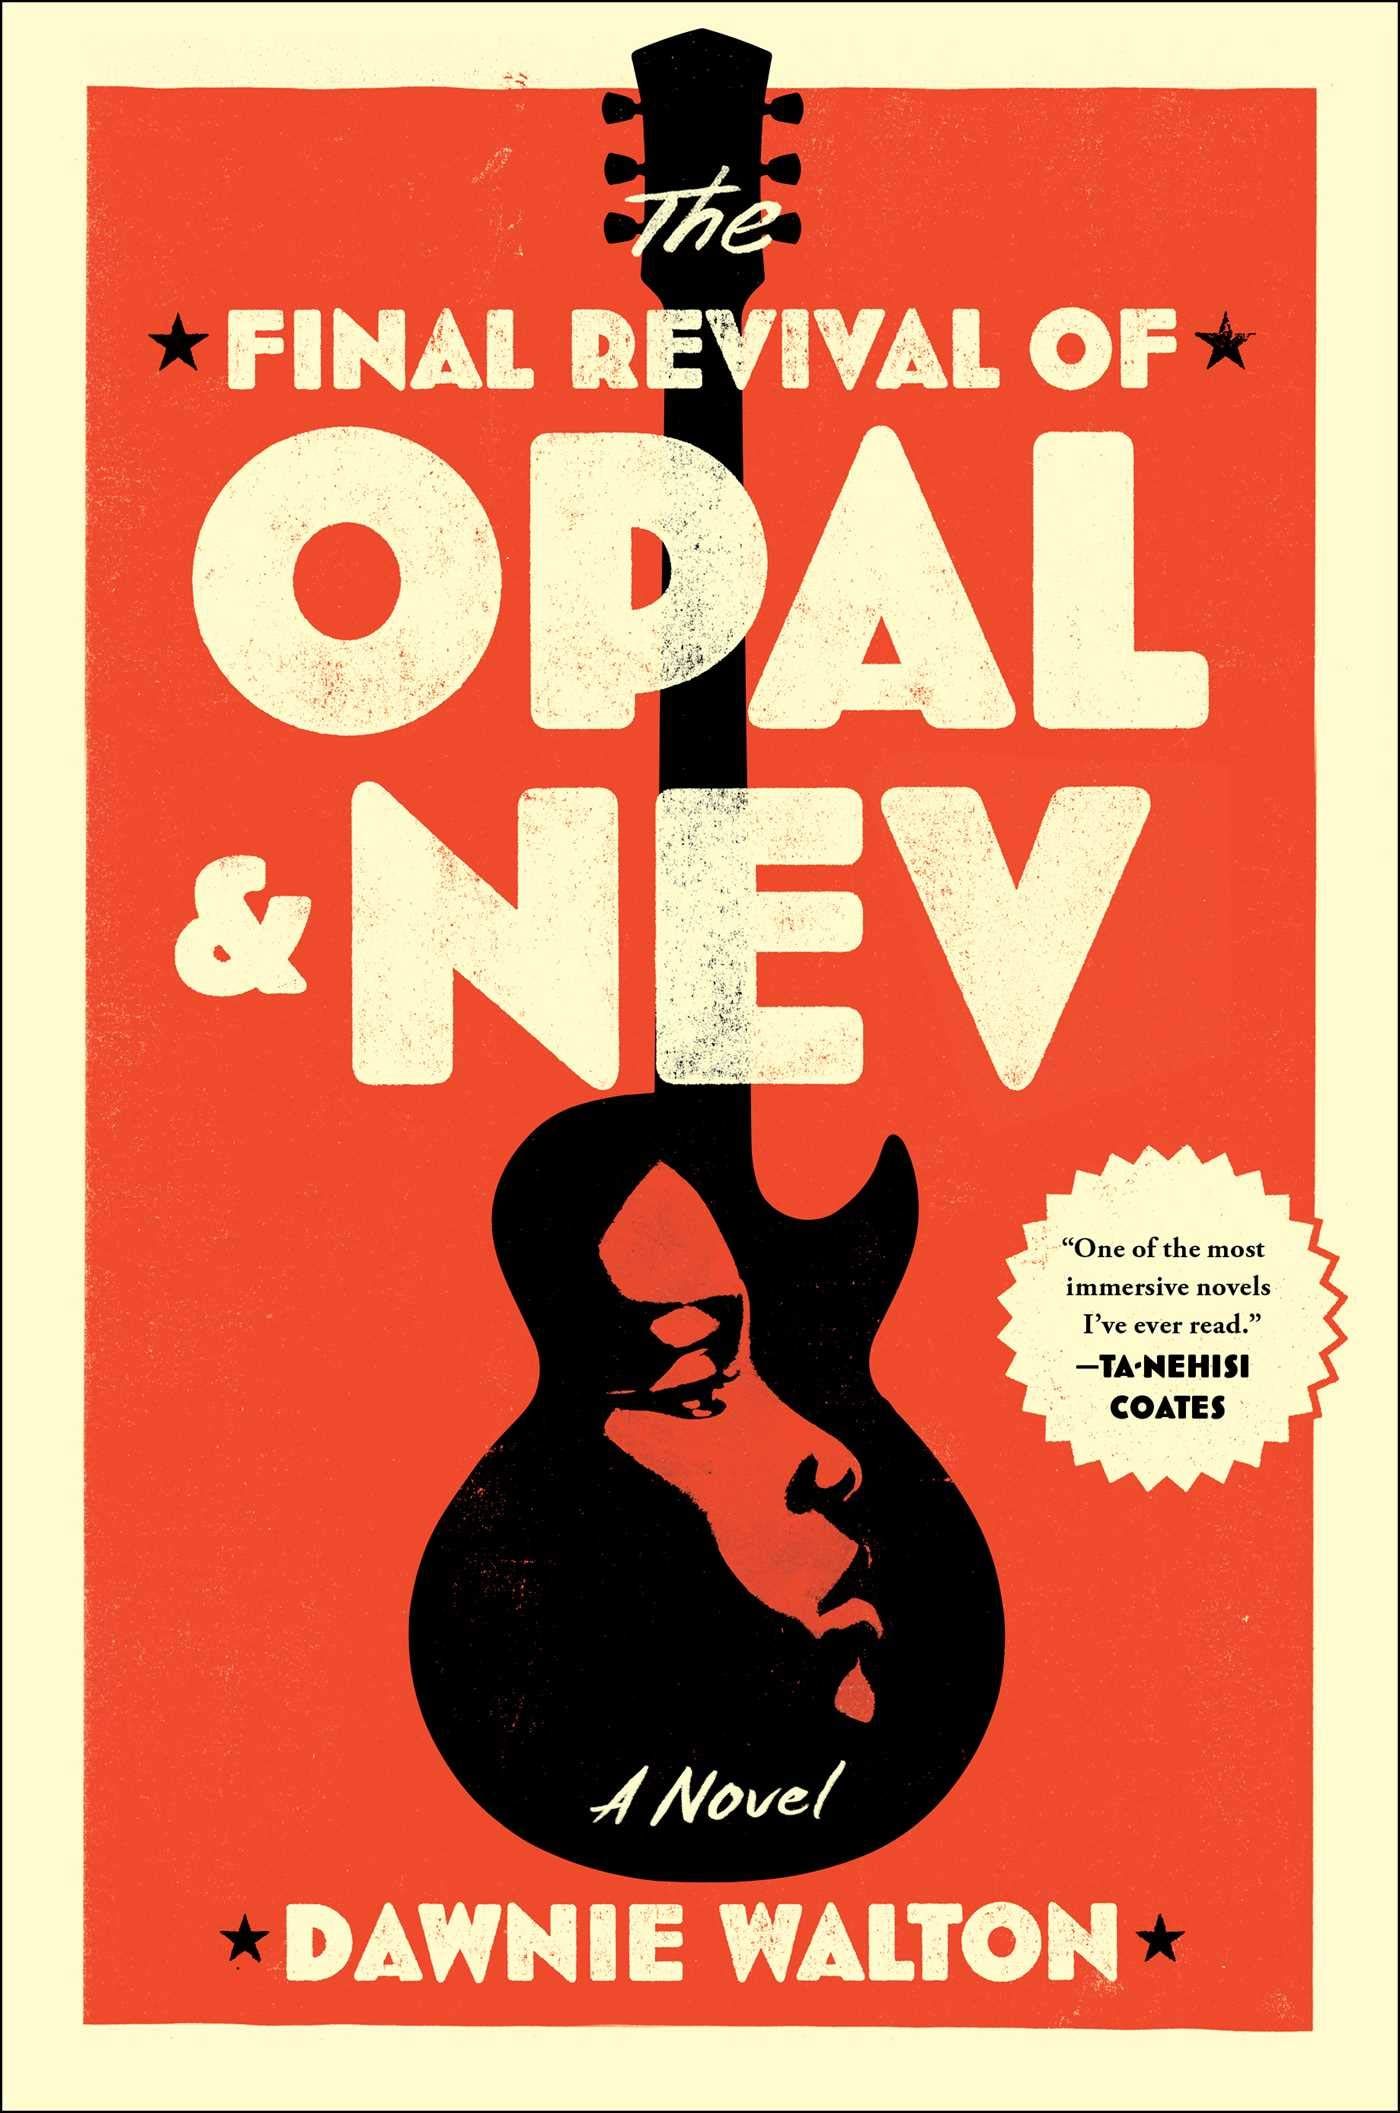 The Final Revival of Opal and Nev cover Dawnie Walton